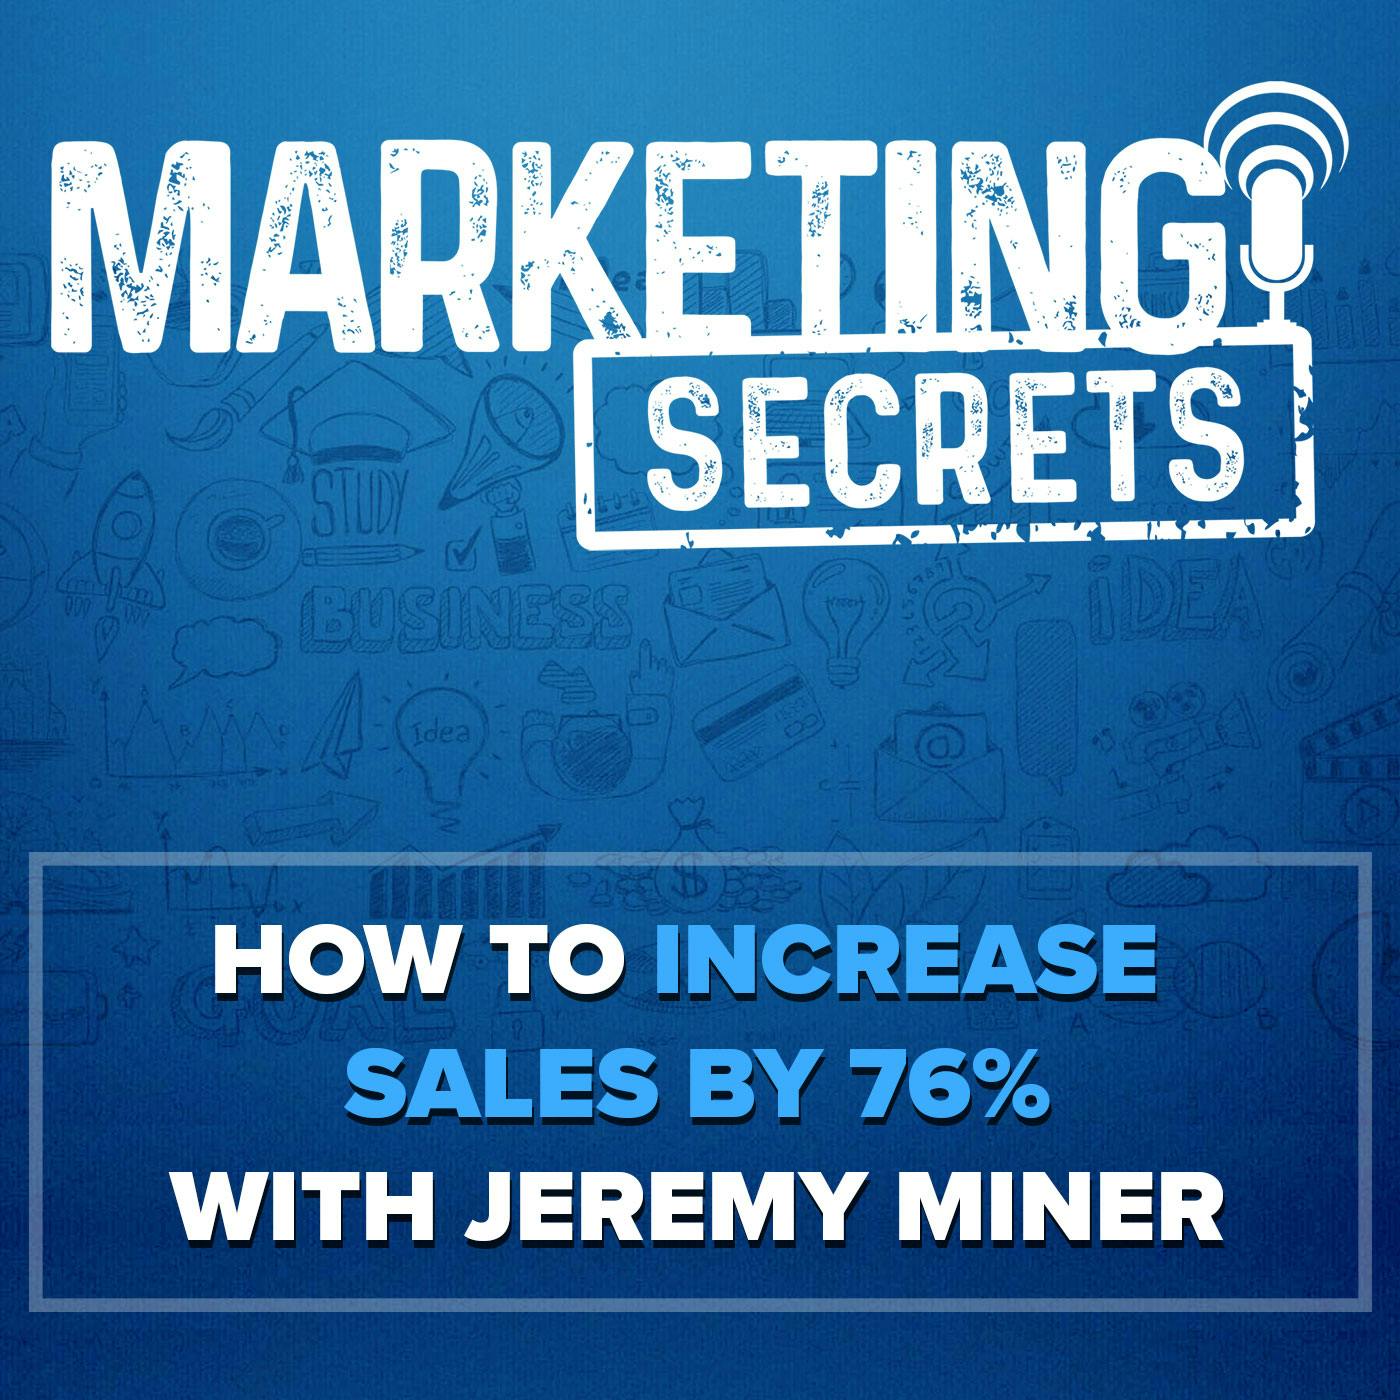 How to Increase Sales by 76% - with Jeremy Miner